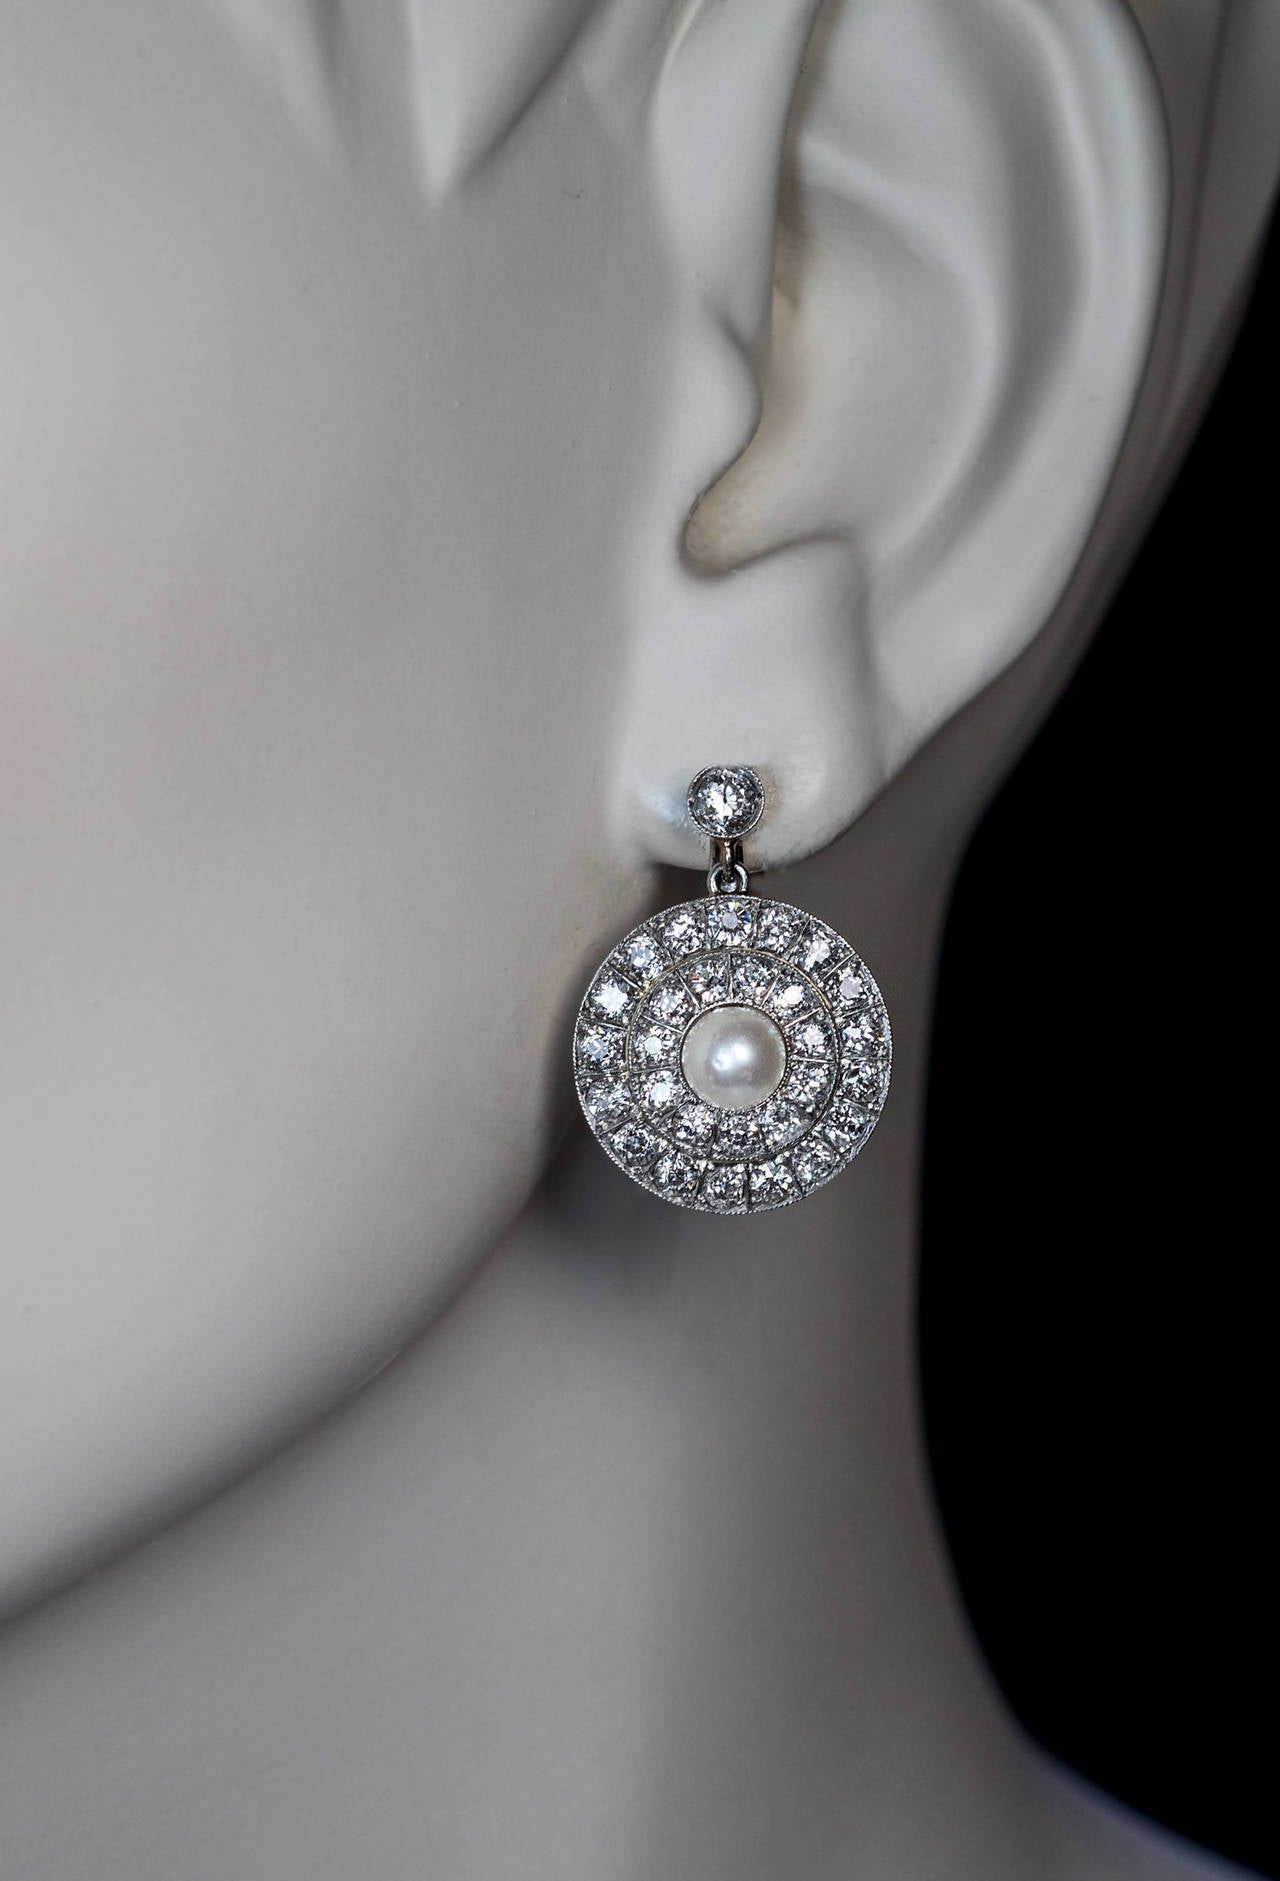 A pair of platinum topped gold earrings, circa 1915, each centered with a 5.6 mm pearl surrounded by two rows of bright white (F-G color) antique round English cut diamonds

Estimated total diamond weight 4 carats

Diameter 18 mm (11/16